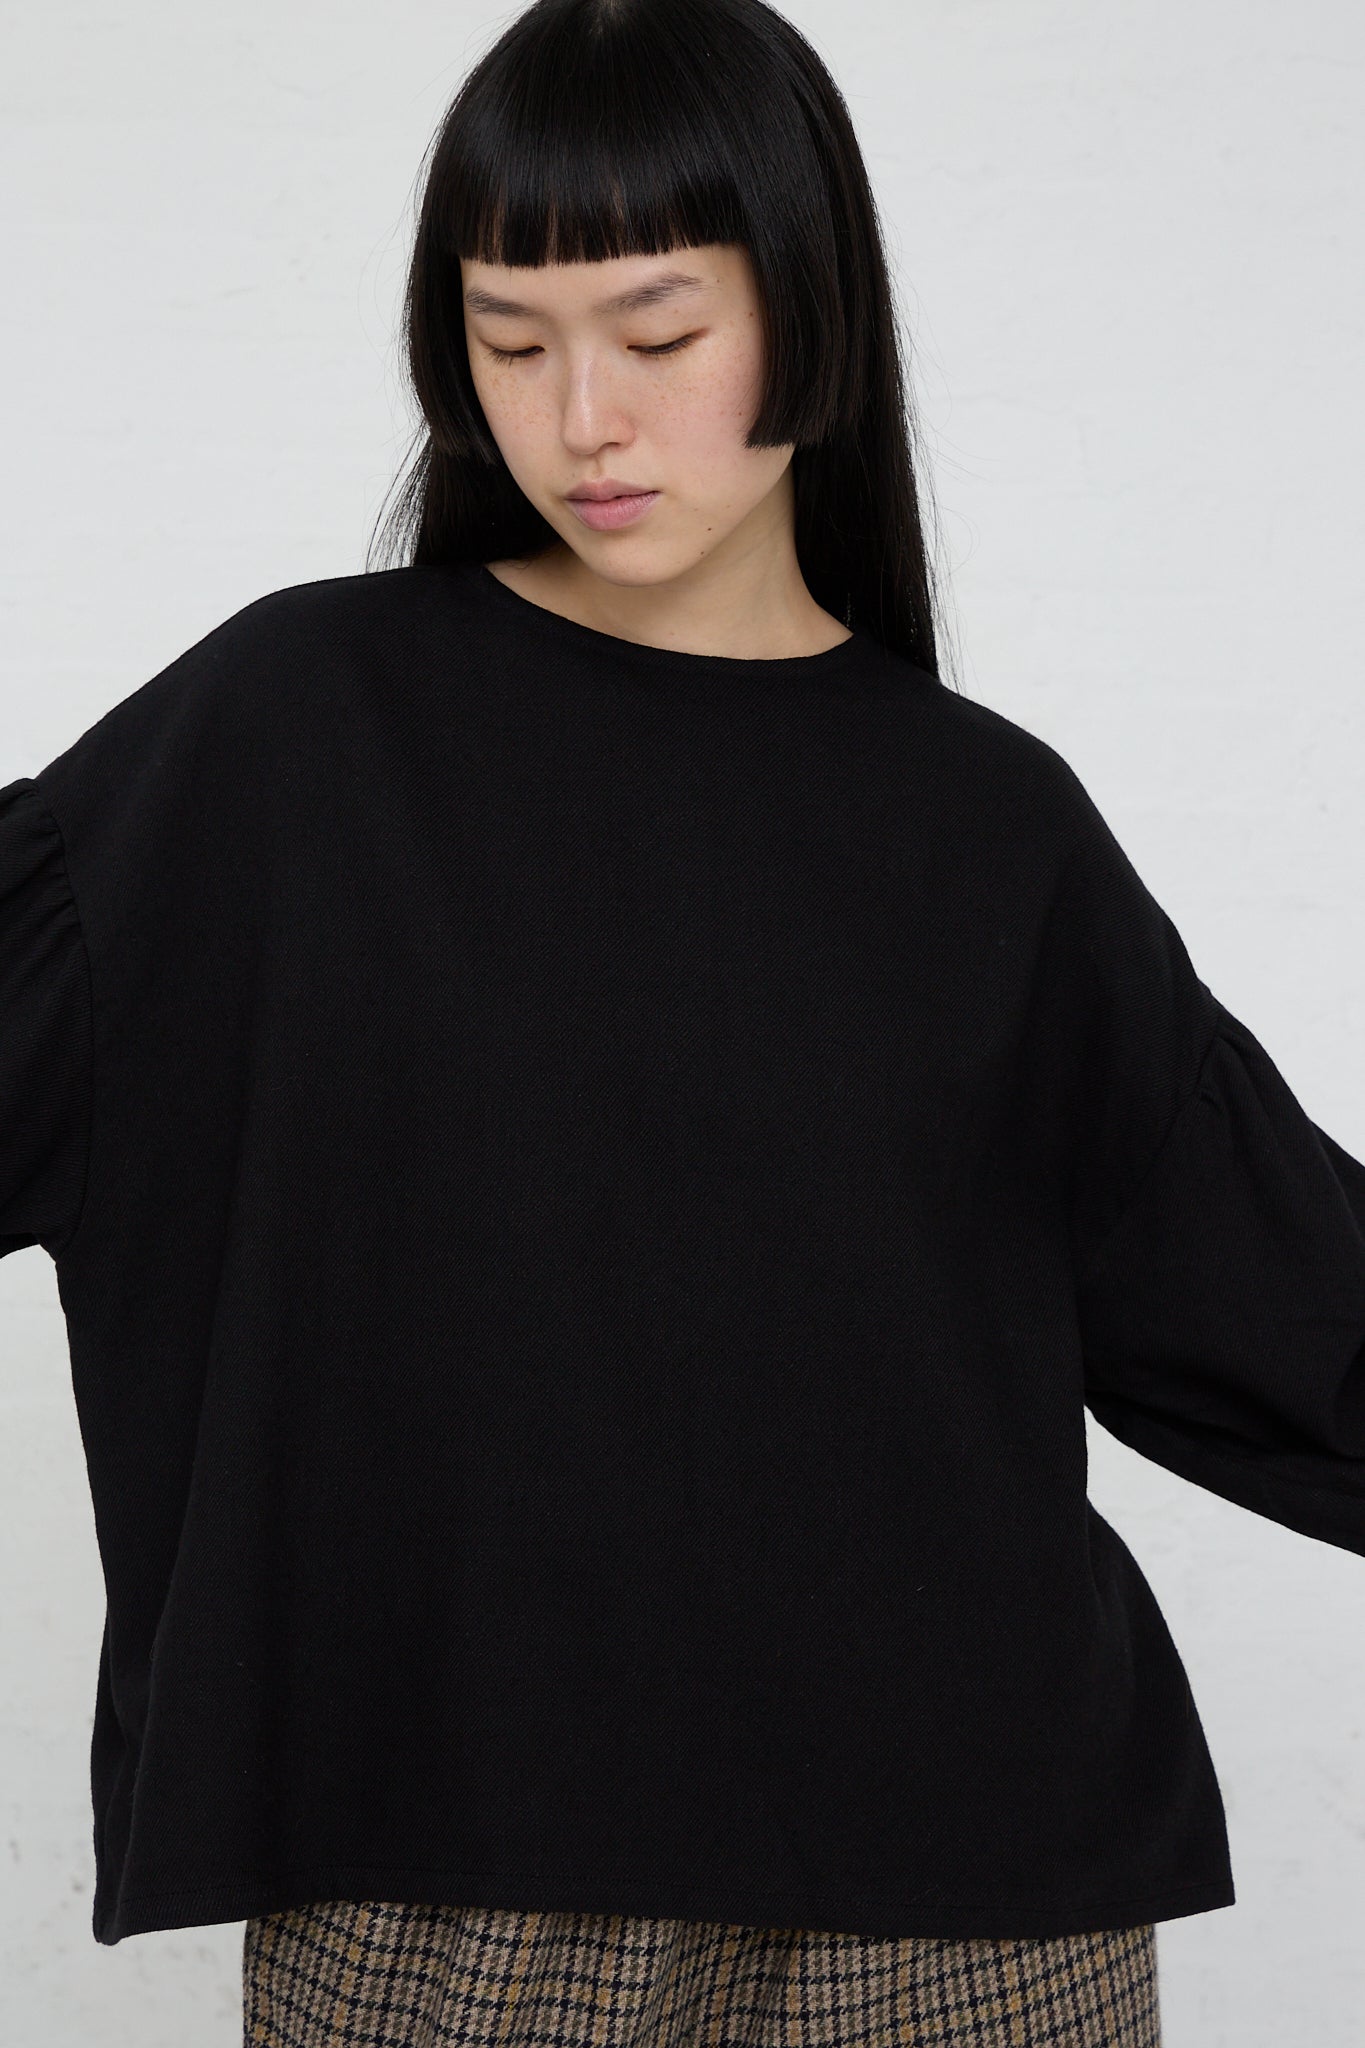 The model is wearing a relaxed fit Two-Way Blouse in Black with puff sleeves by Ichi.